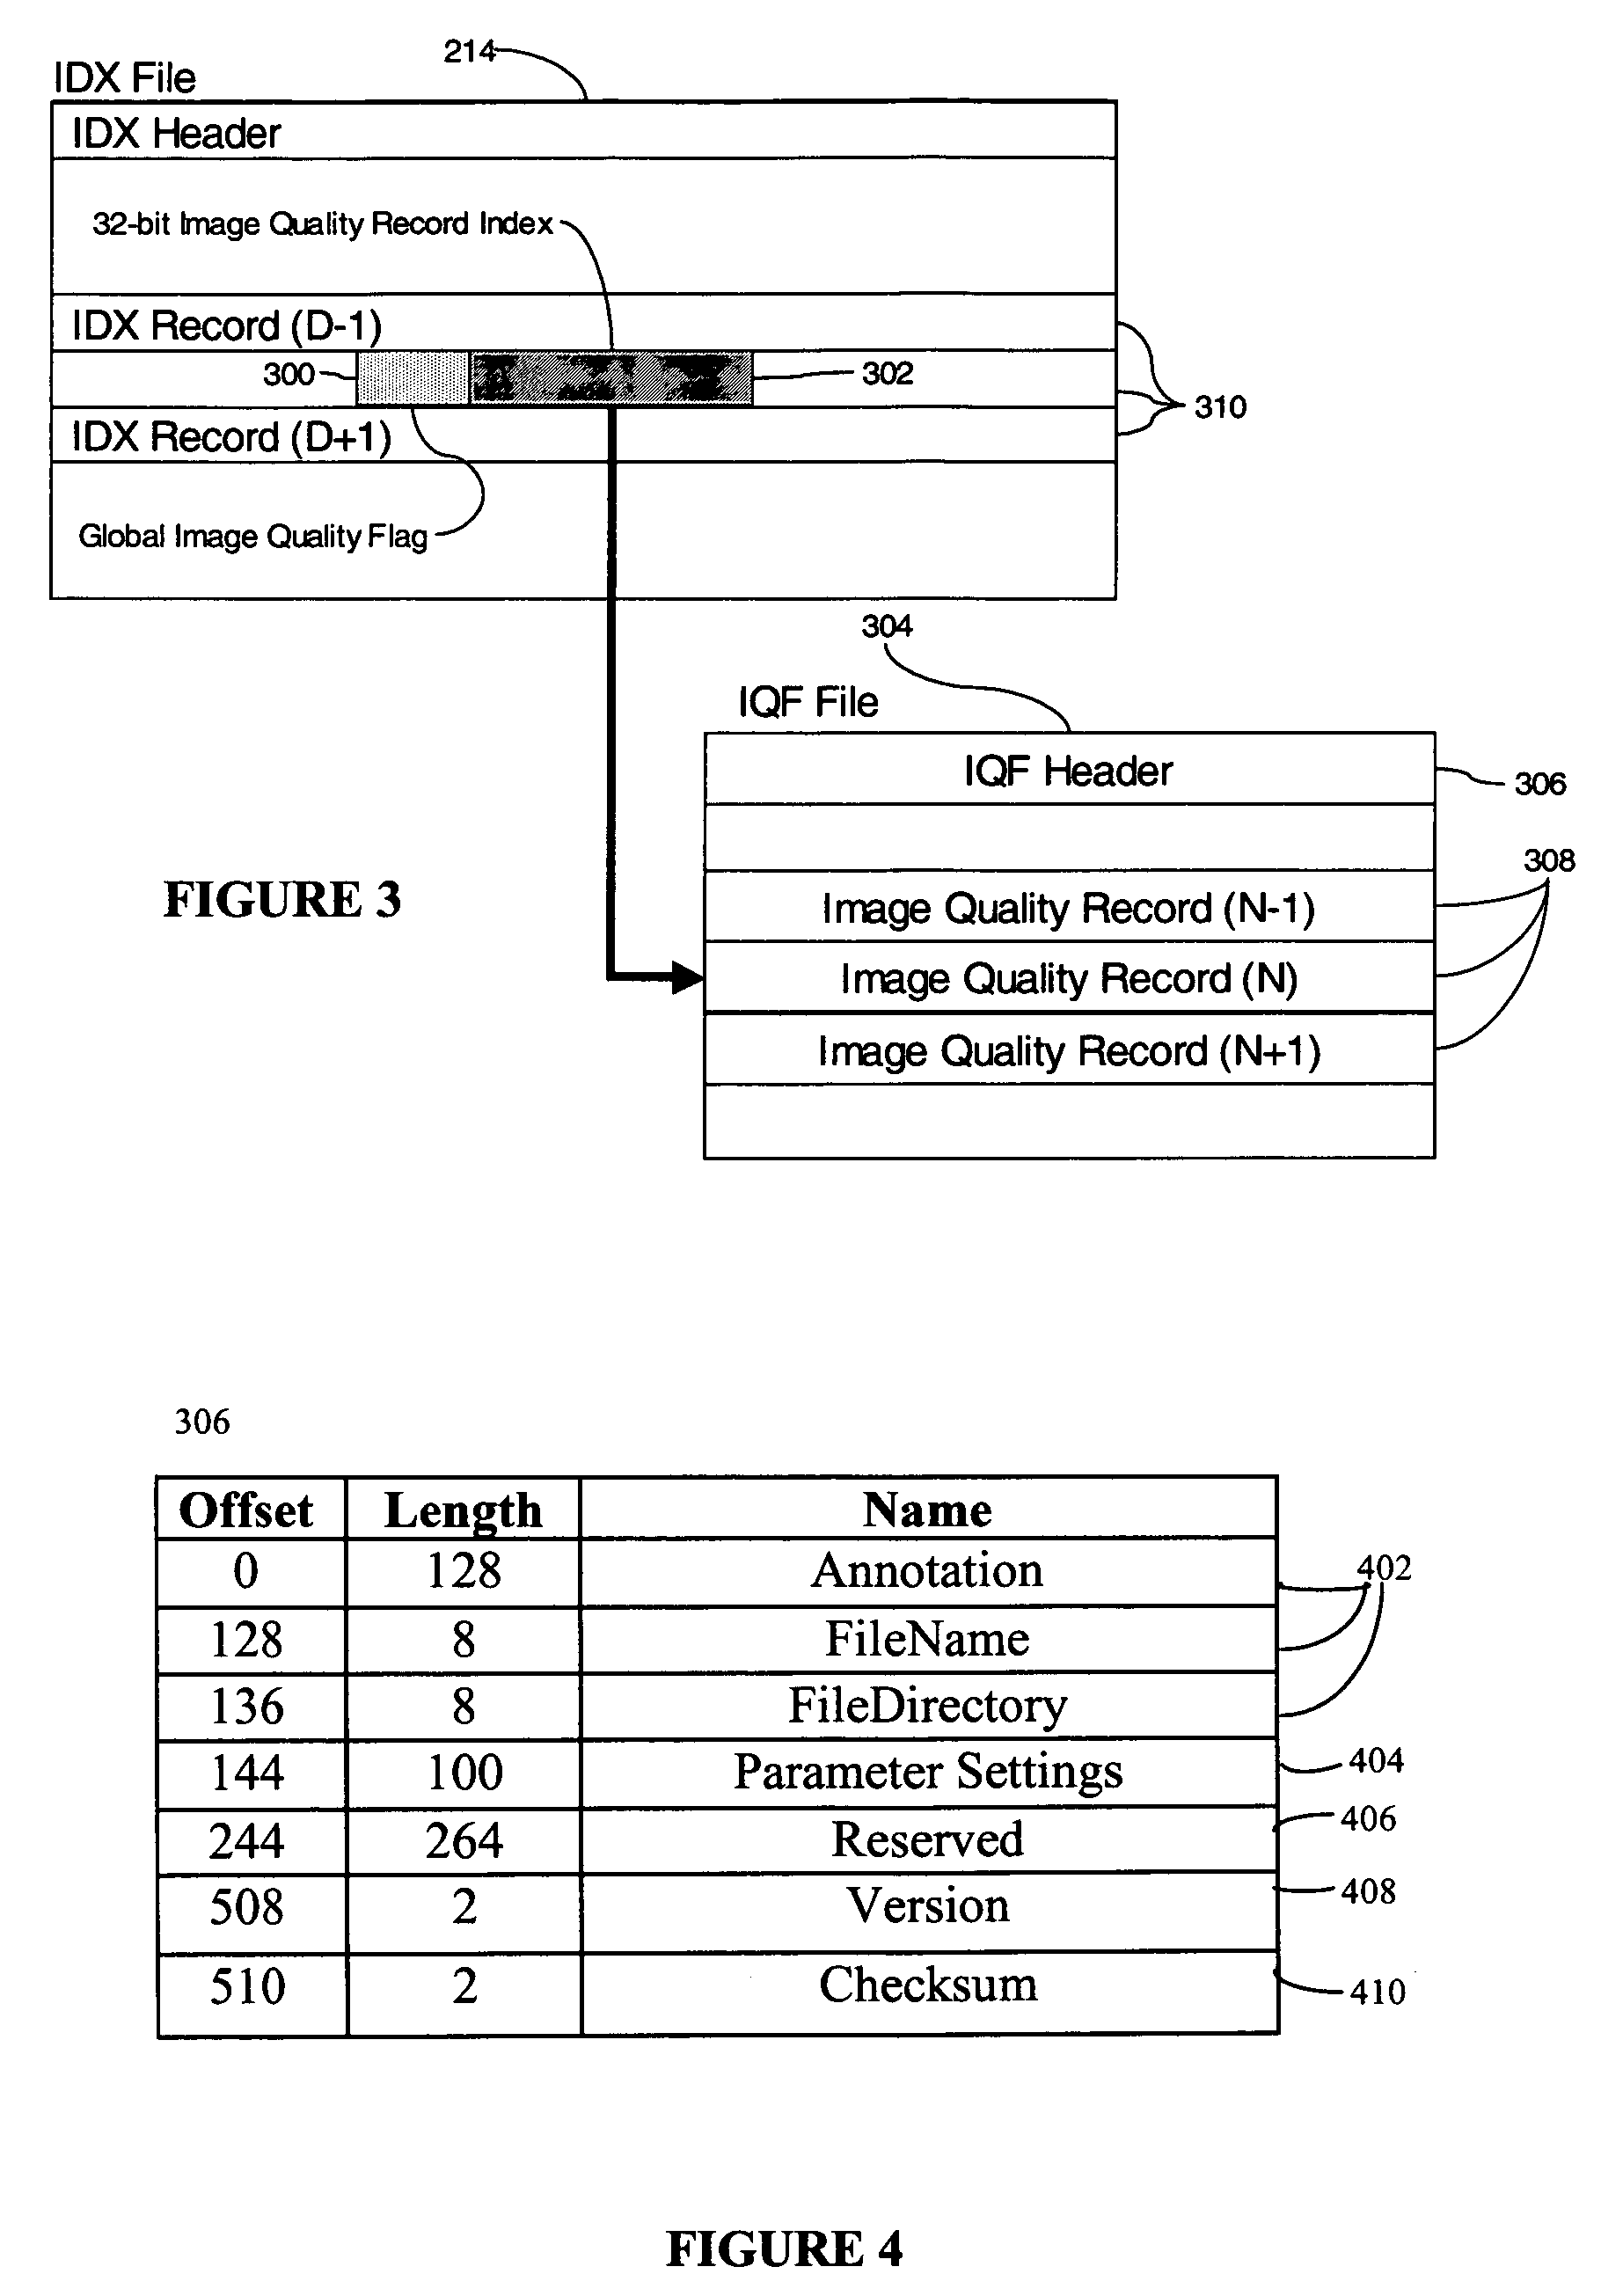 Image file arrangement for use with an improved image quality assurance system